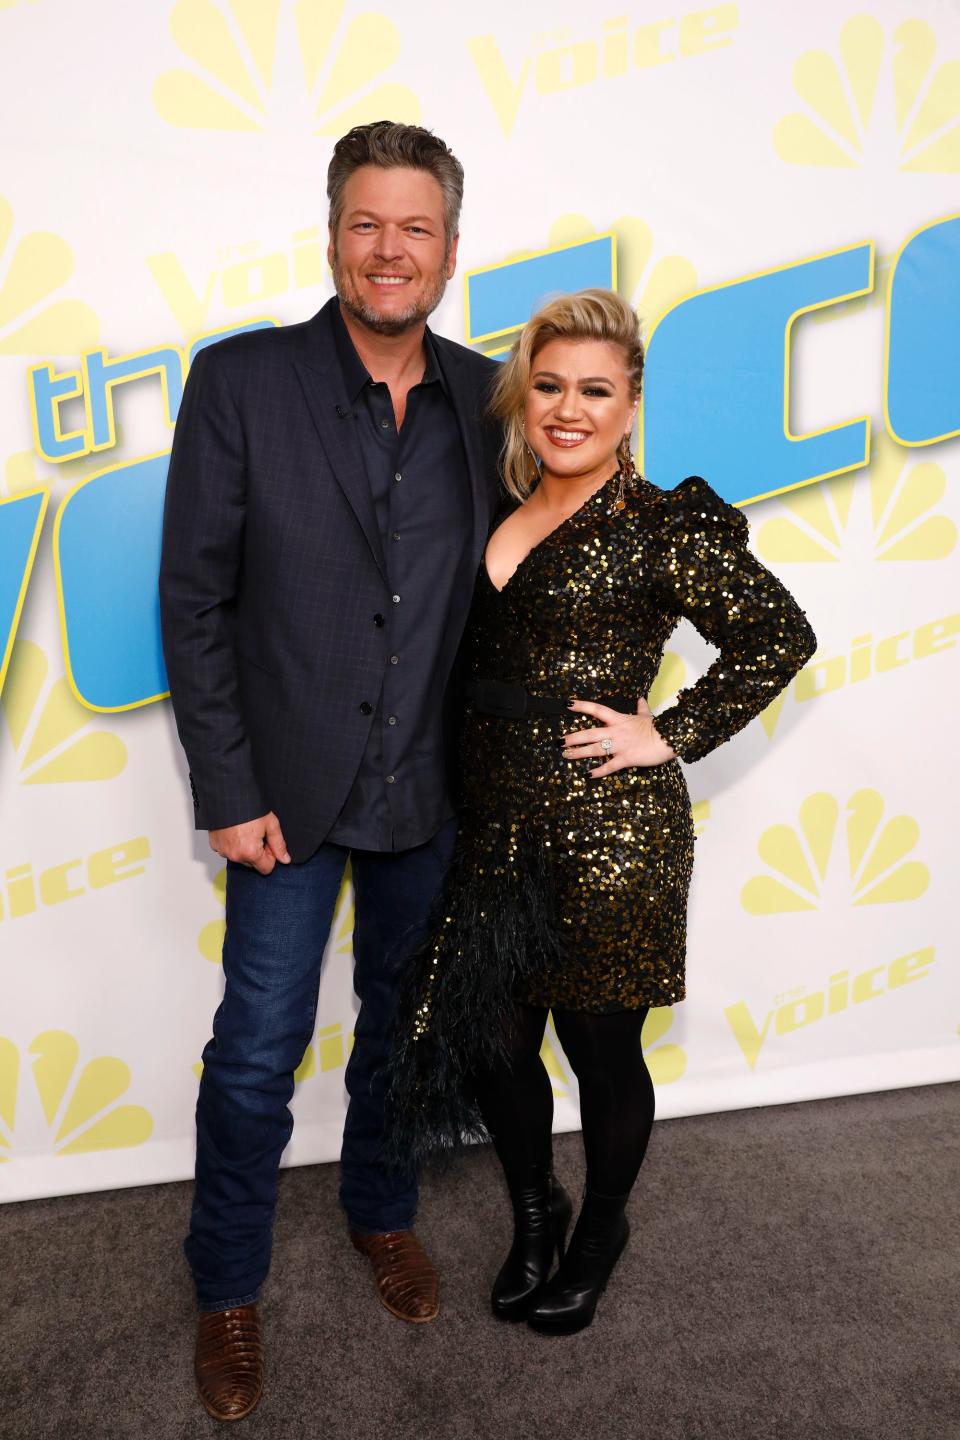 Blake Shelton and Kelly Clarkson, judges on "The Voice"